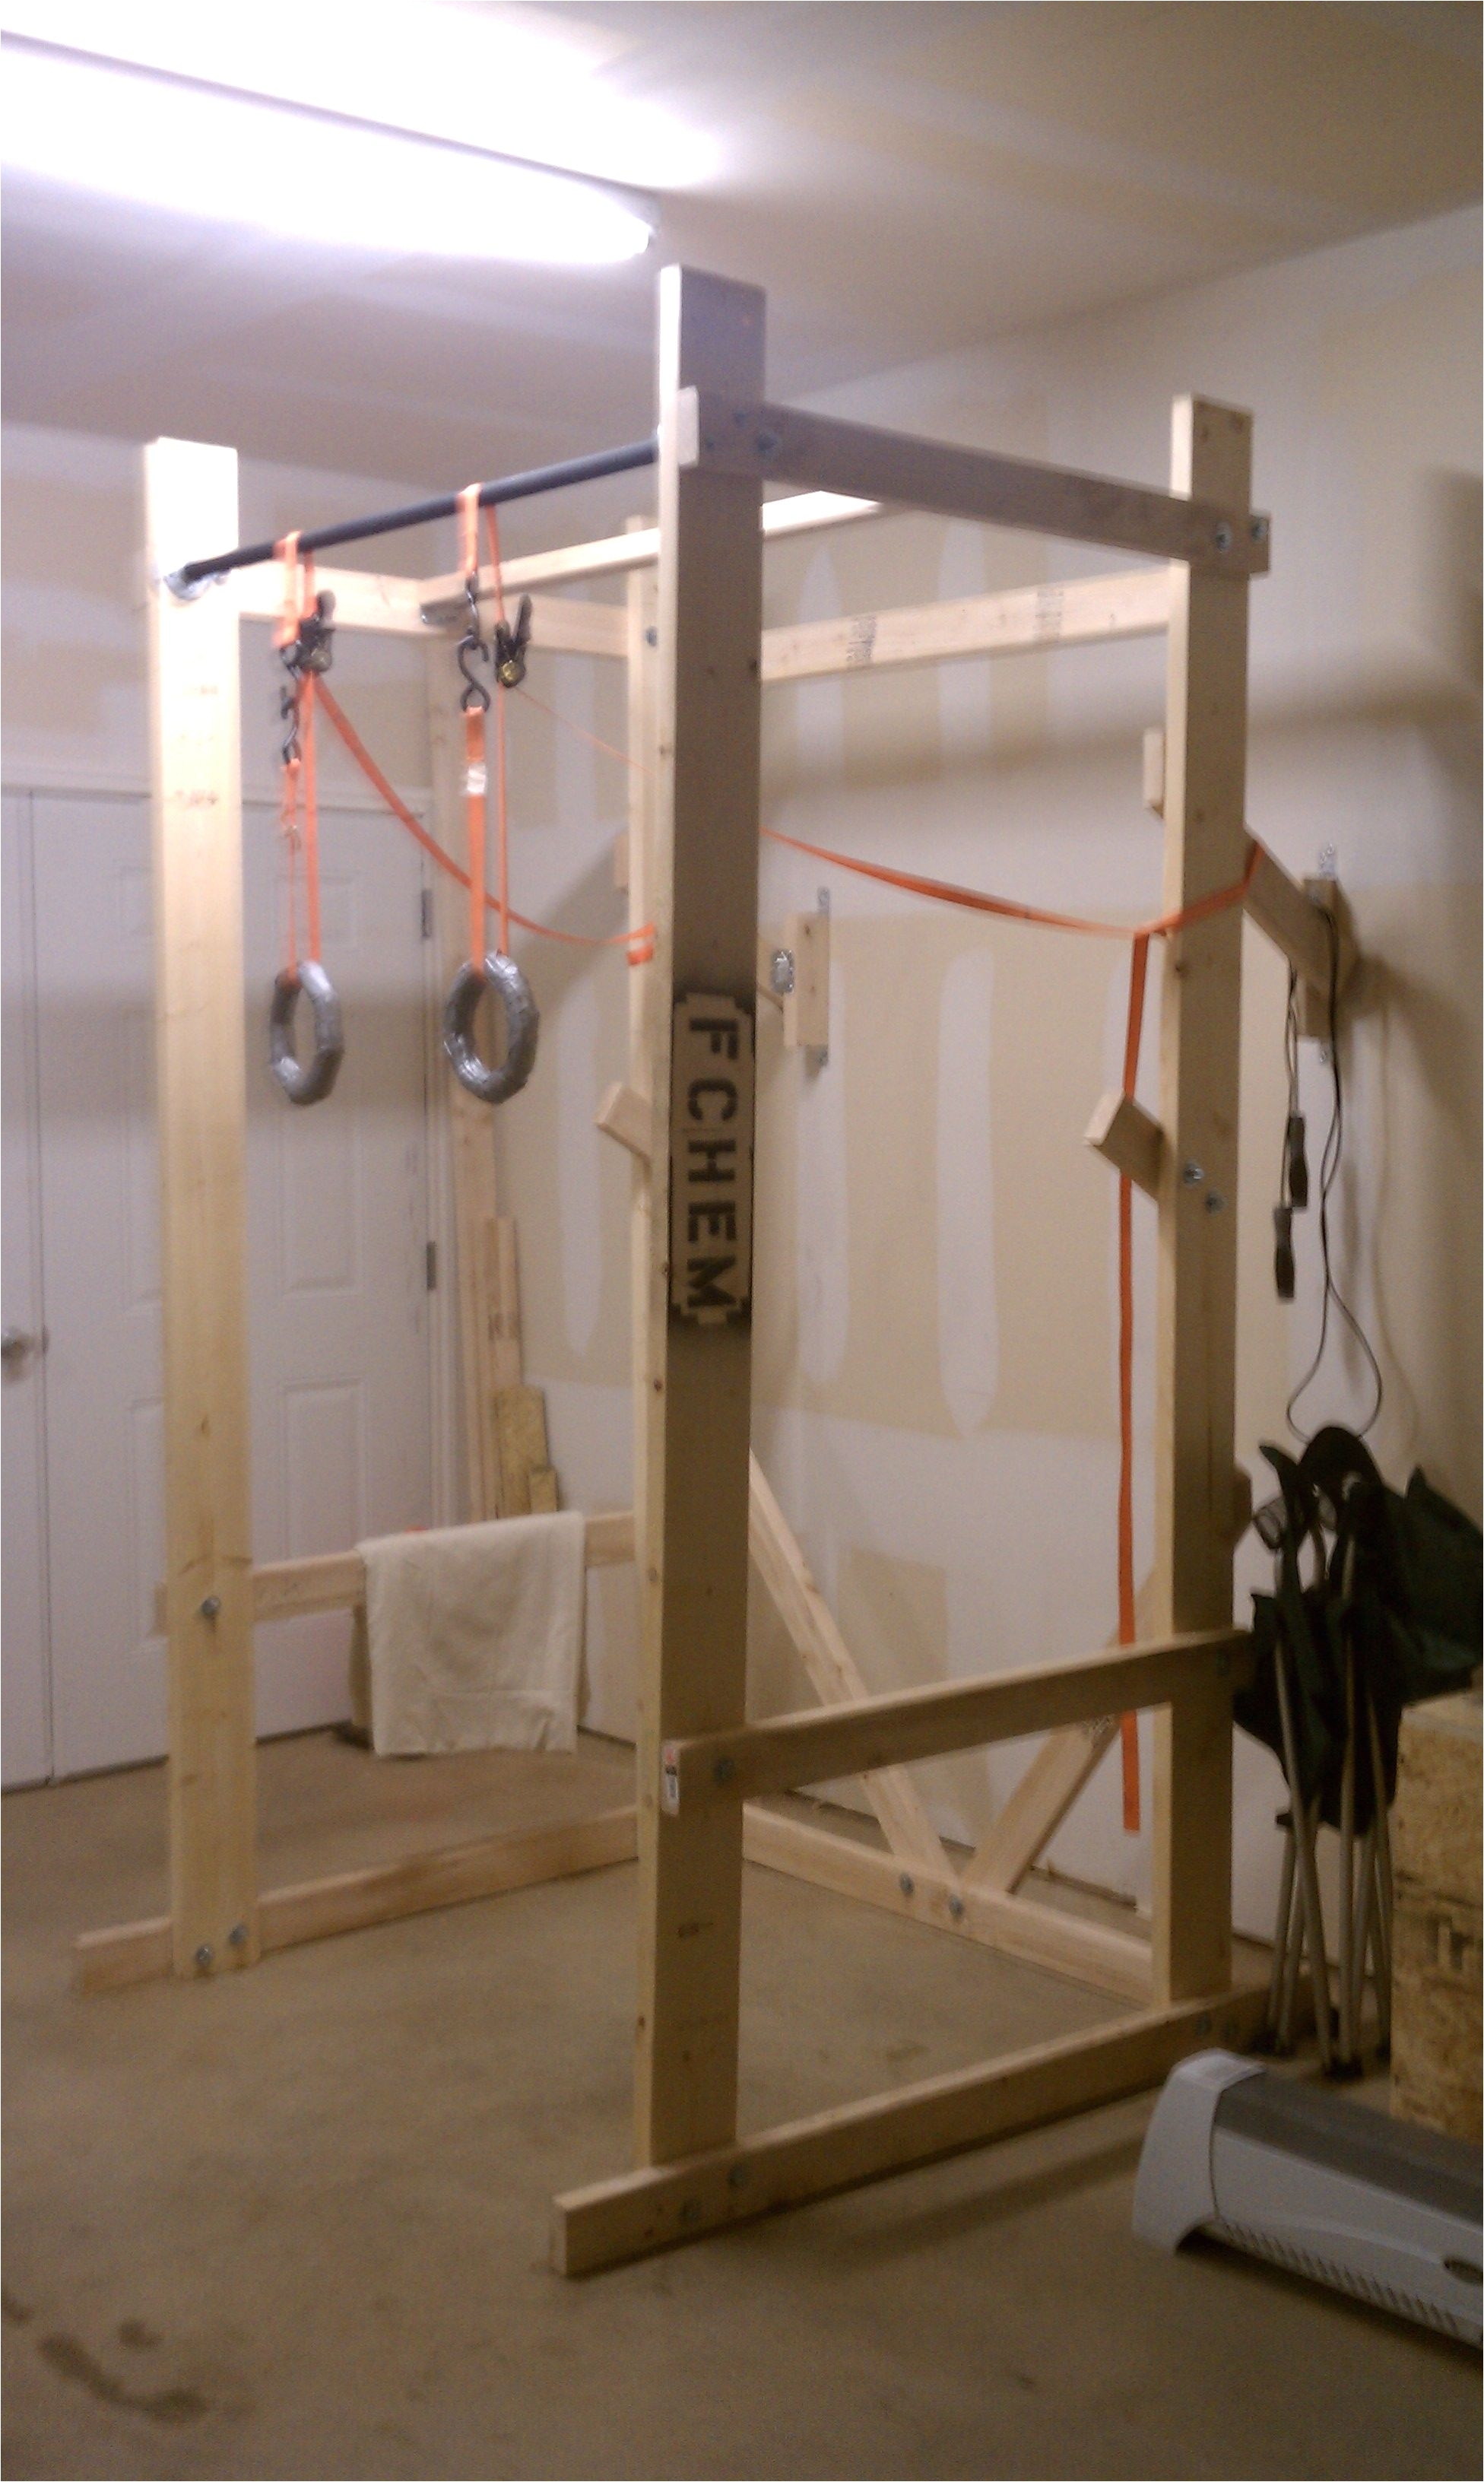 build your own power rack this guy has some crazy diy ideas for the garage gym